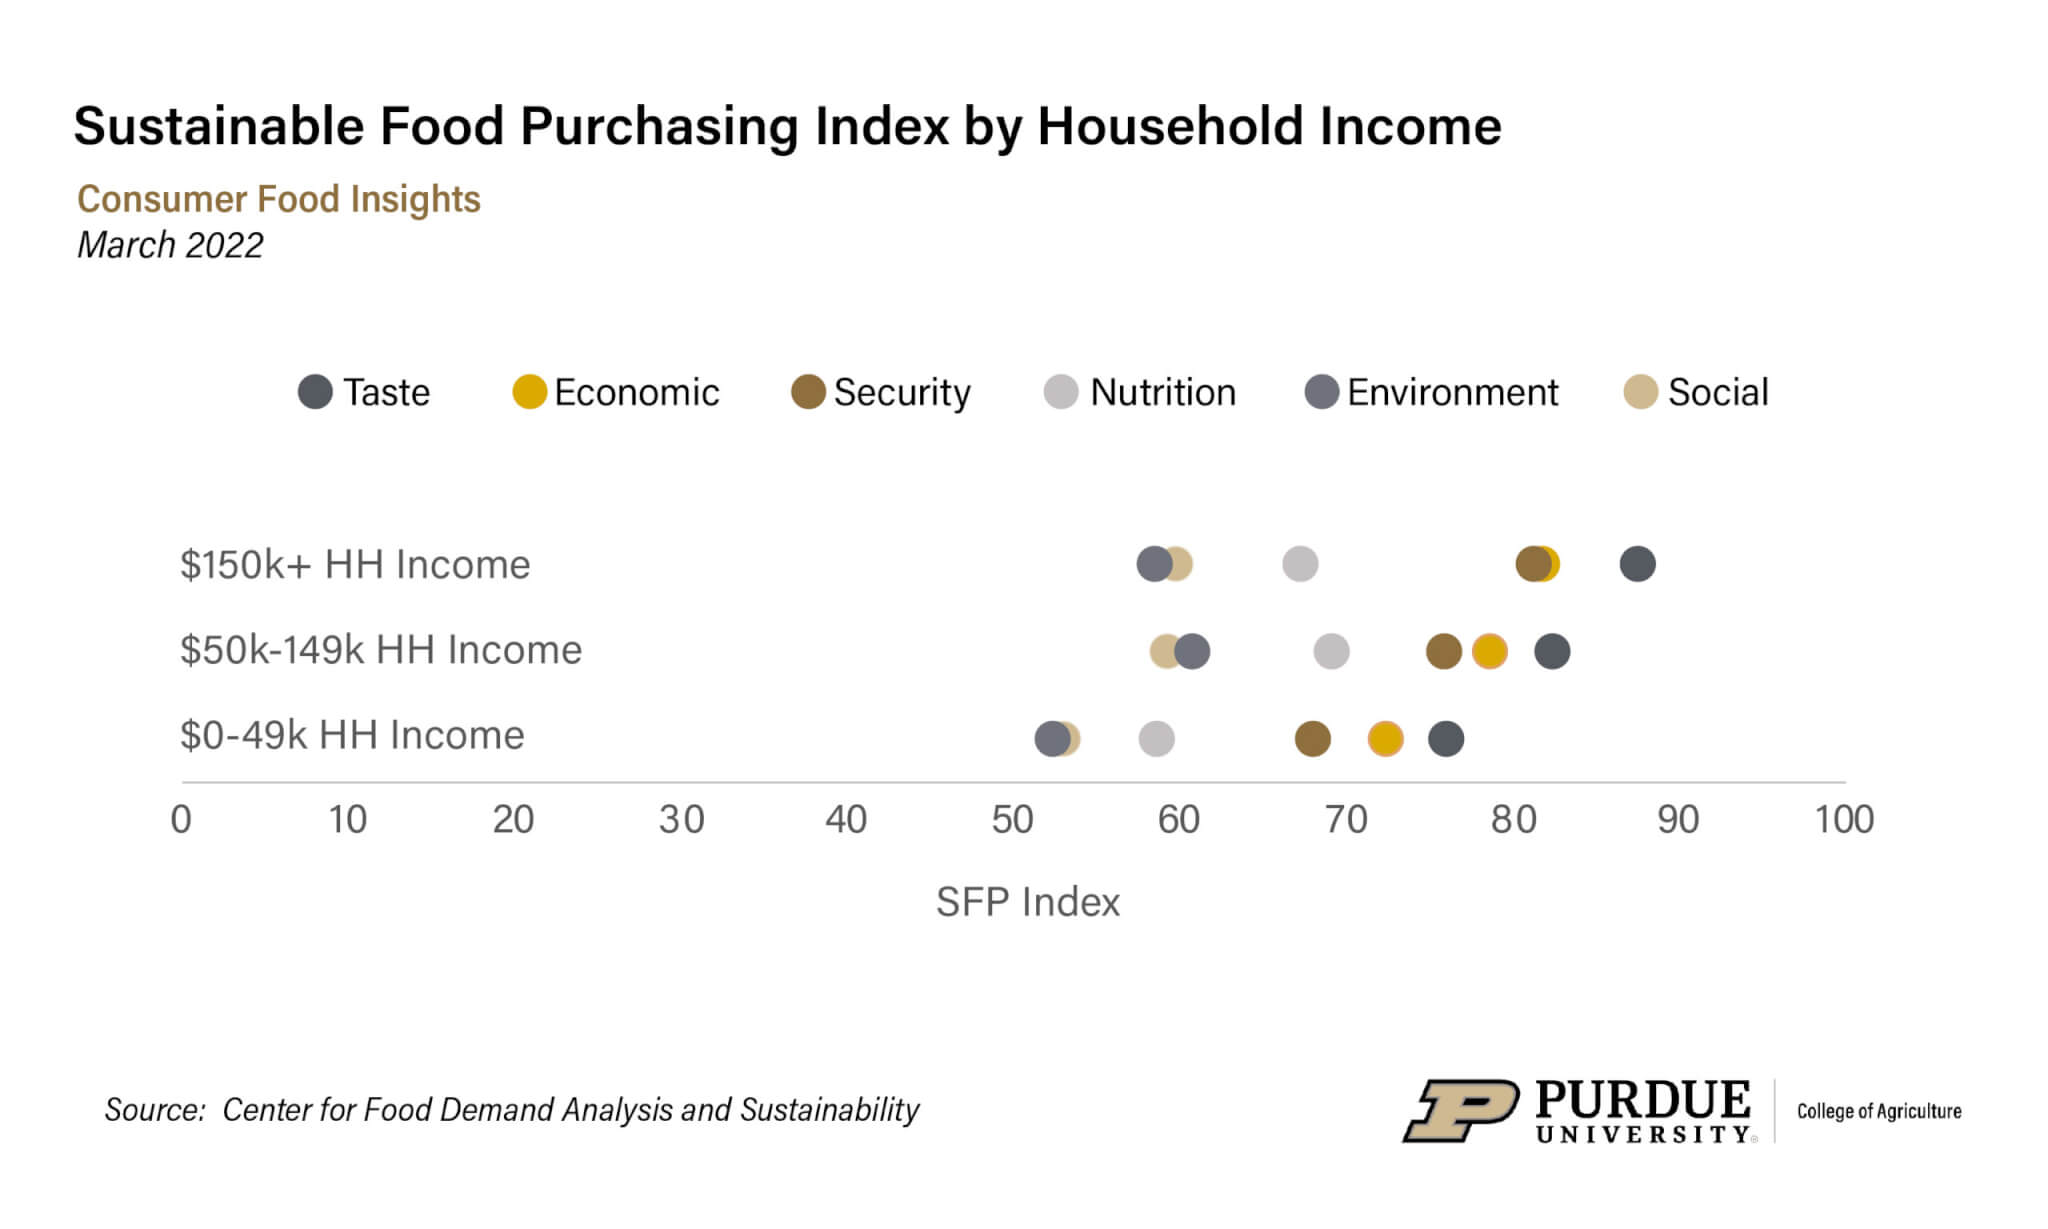 The Consumer Food Insights Report examined differences in responses across low-, middle- and high-income brackets